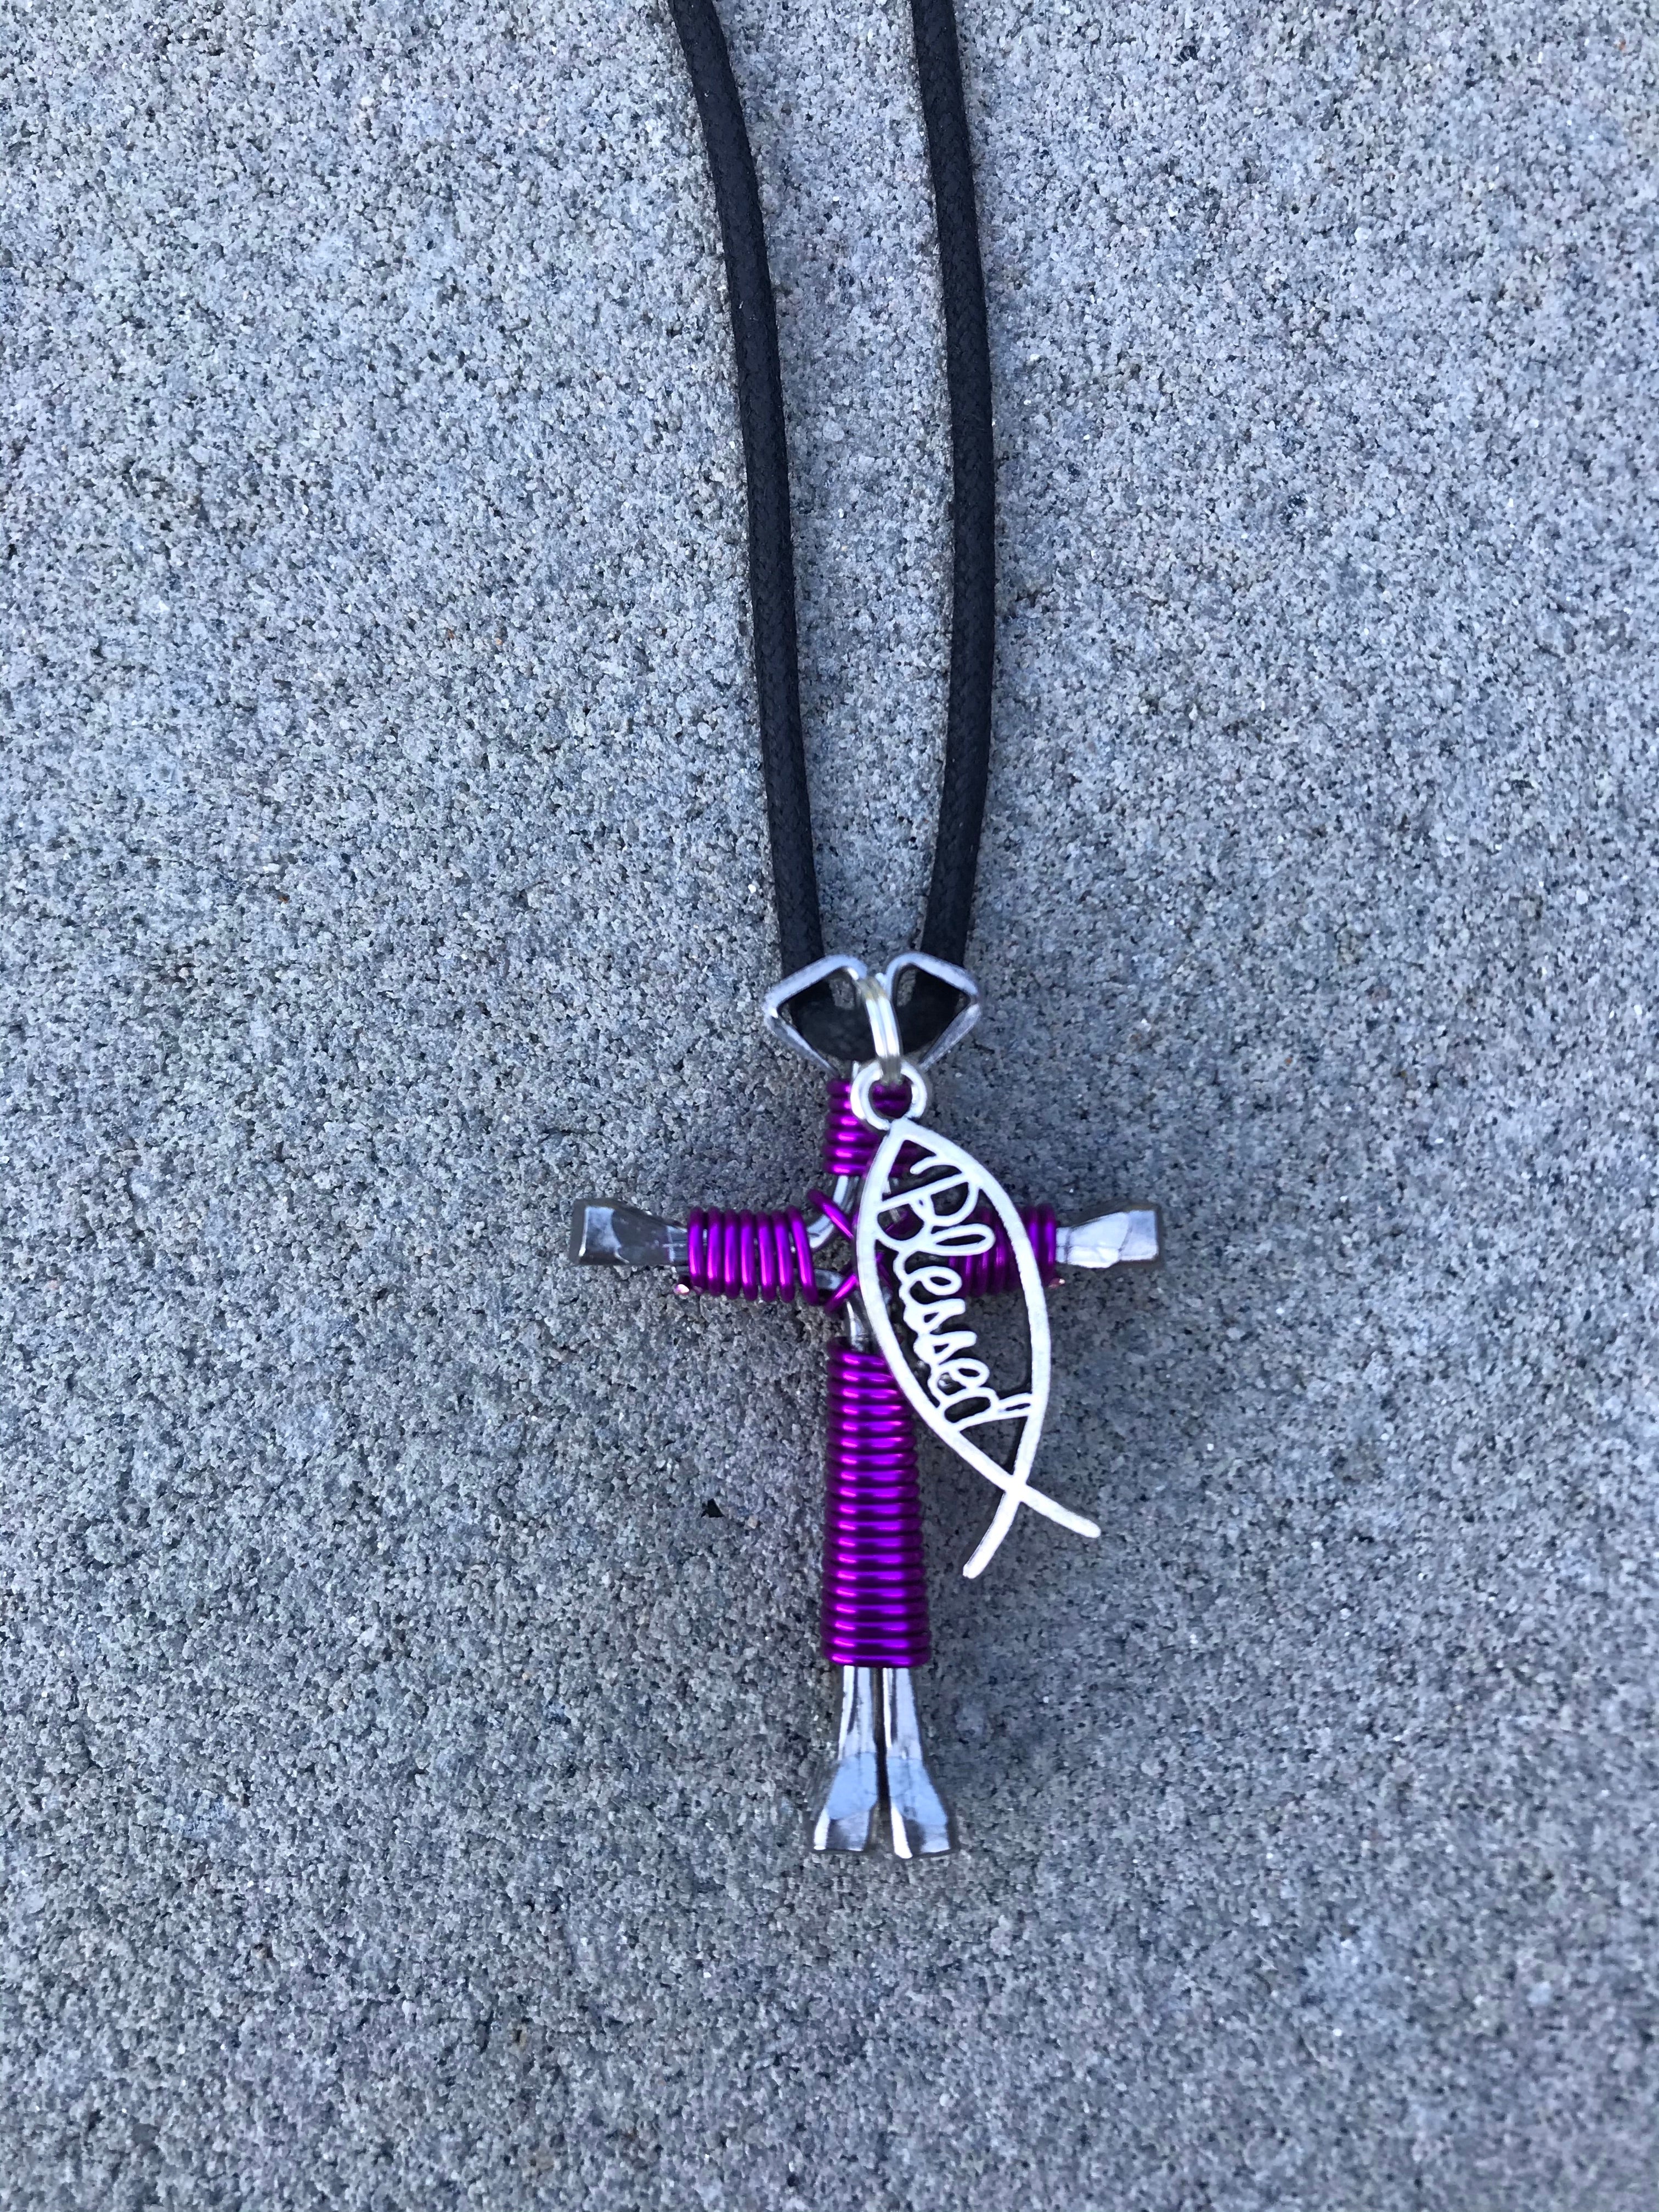 Purple Cross Necklace with Blessed Charm Handmade of 4 Horseshoe Nails